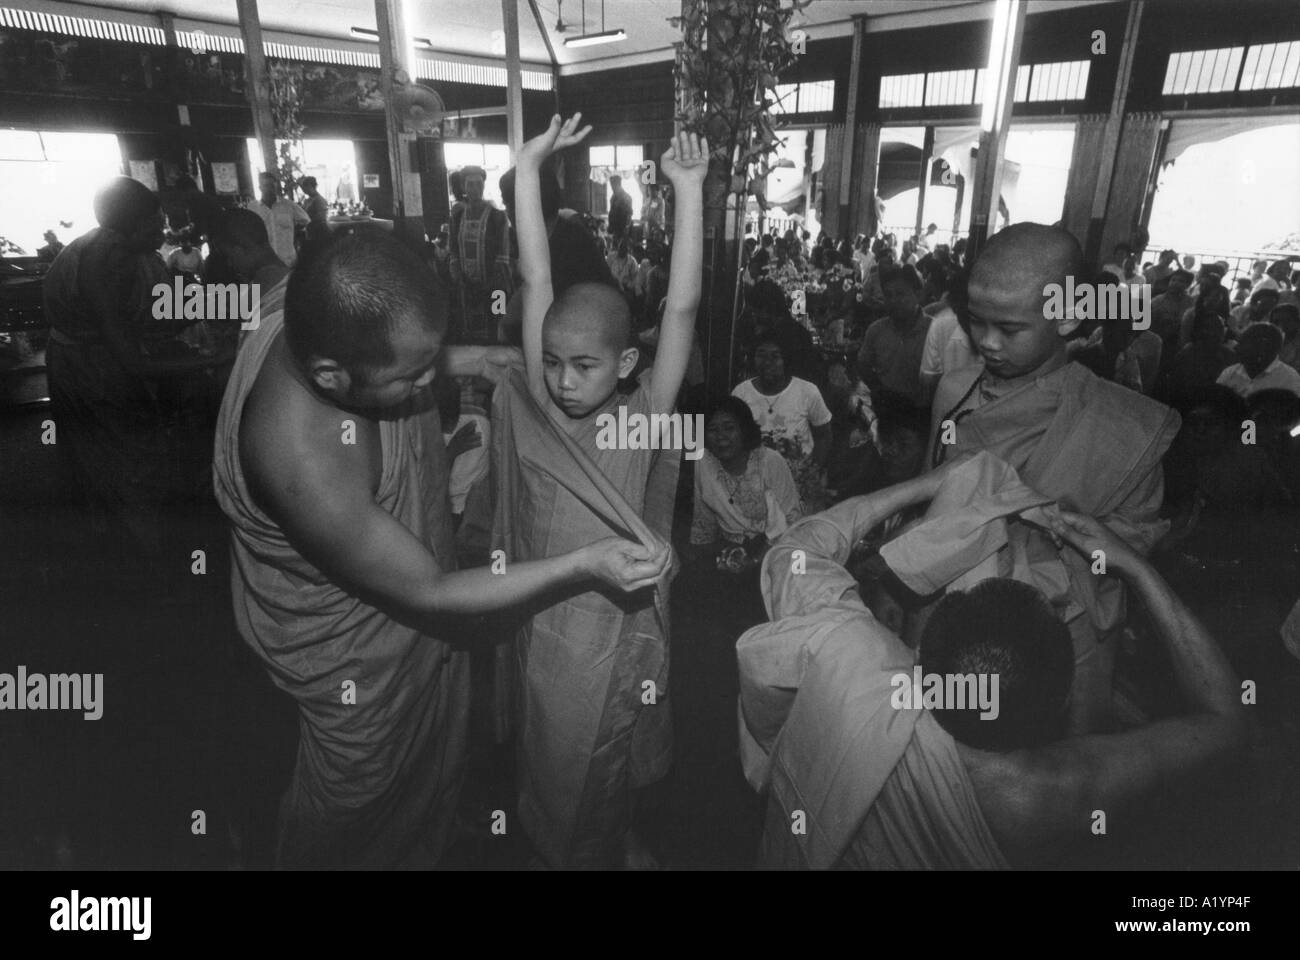 Monks in myanmar Black and White Stock Photos & Images - Alamy